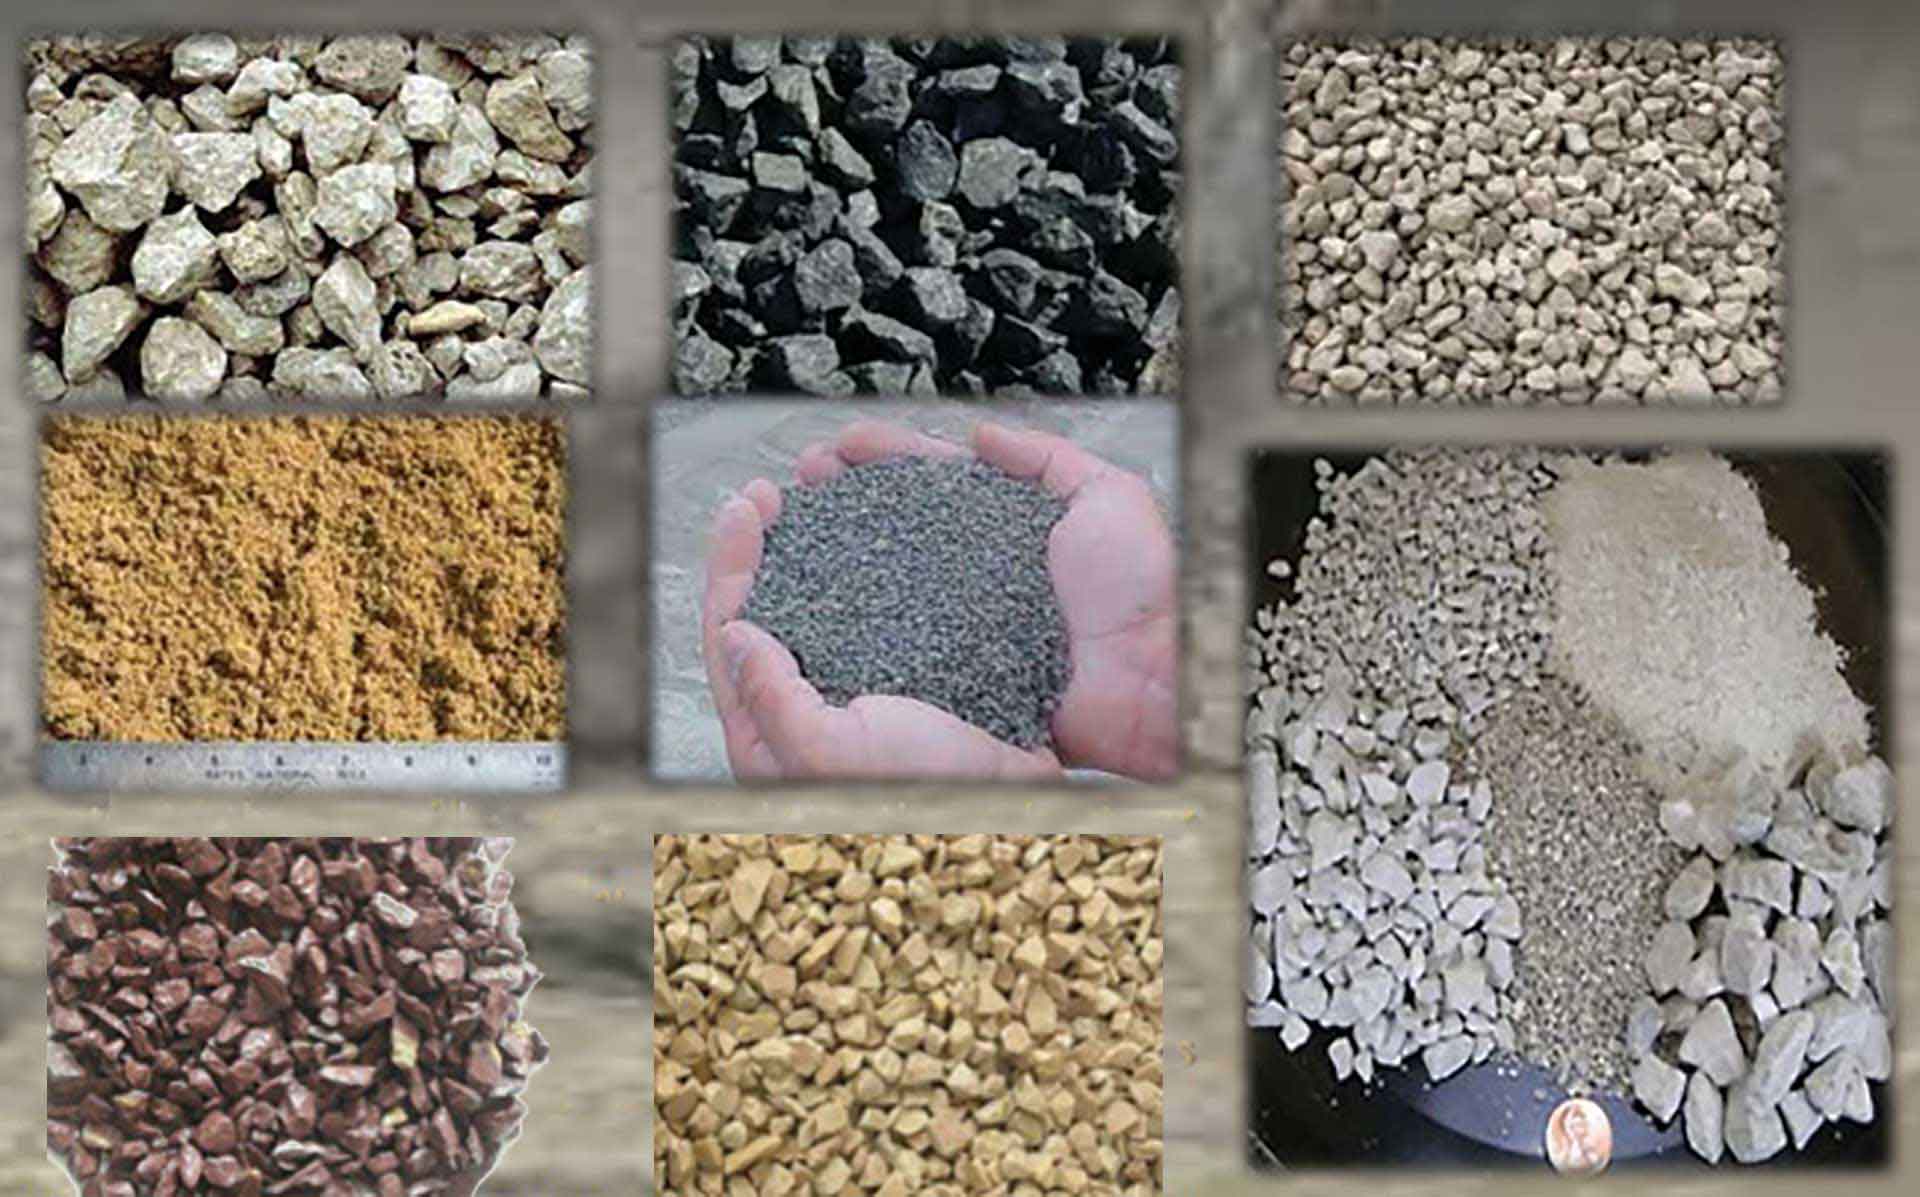 Overview of Concrete Ingredients, Concrete Mixes and Durability Requirements in Arabian Peninsula